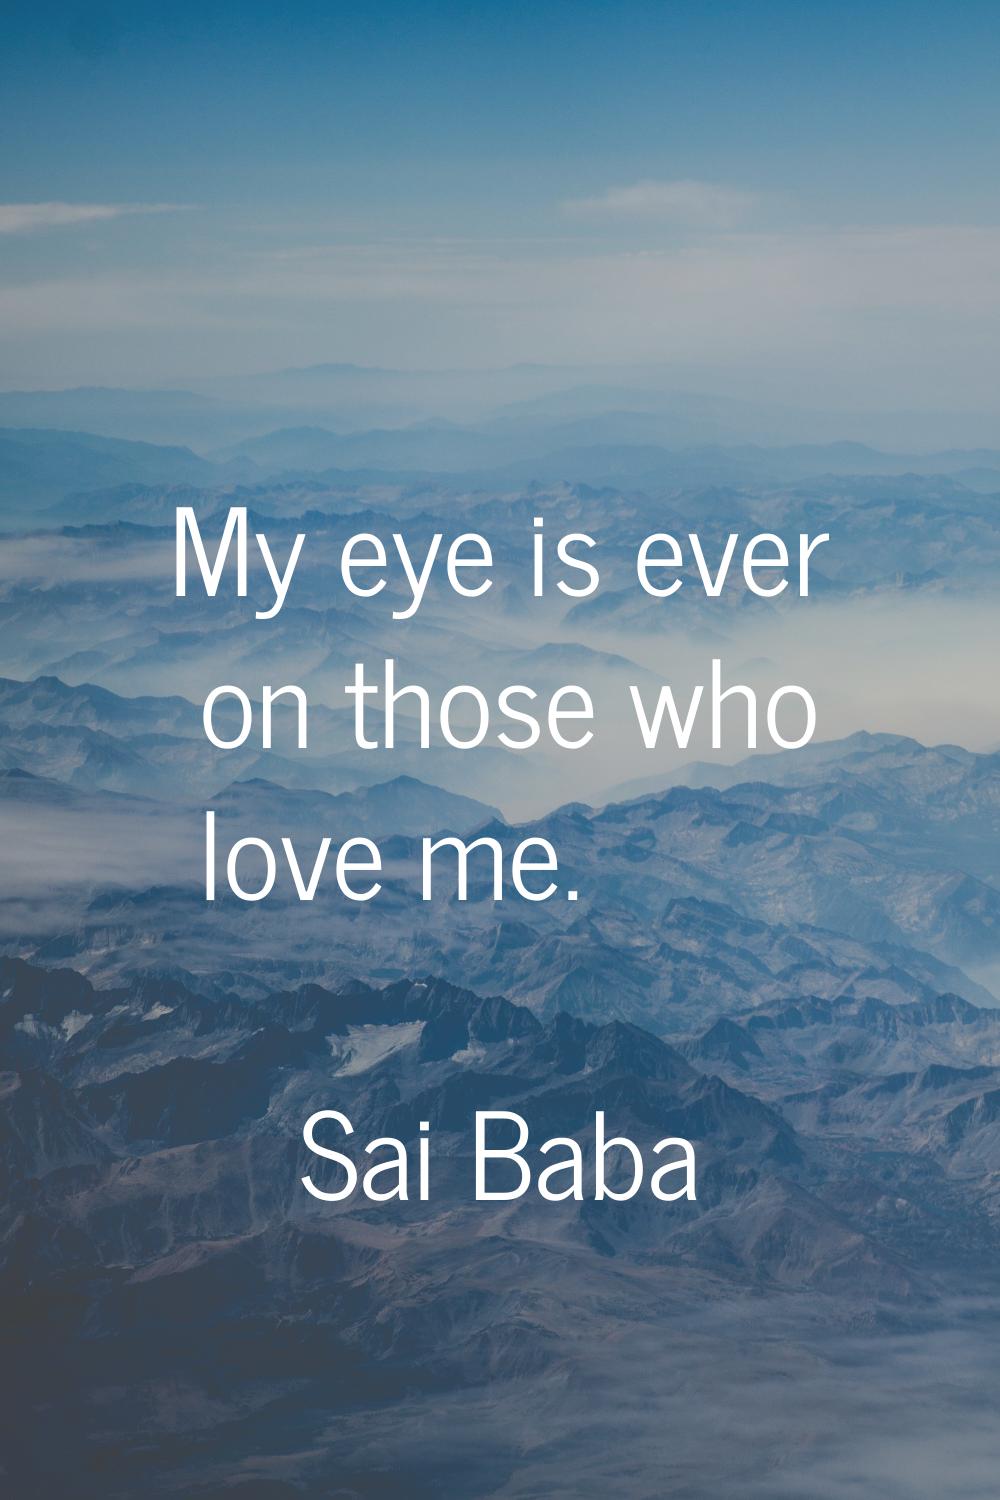 My eye is ever on those who love me.